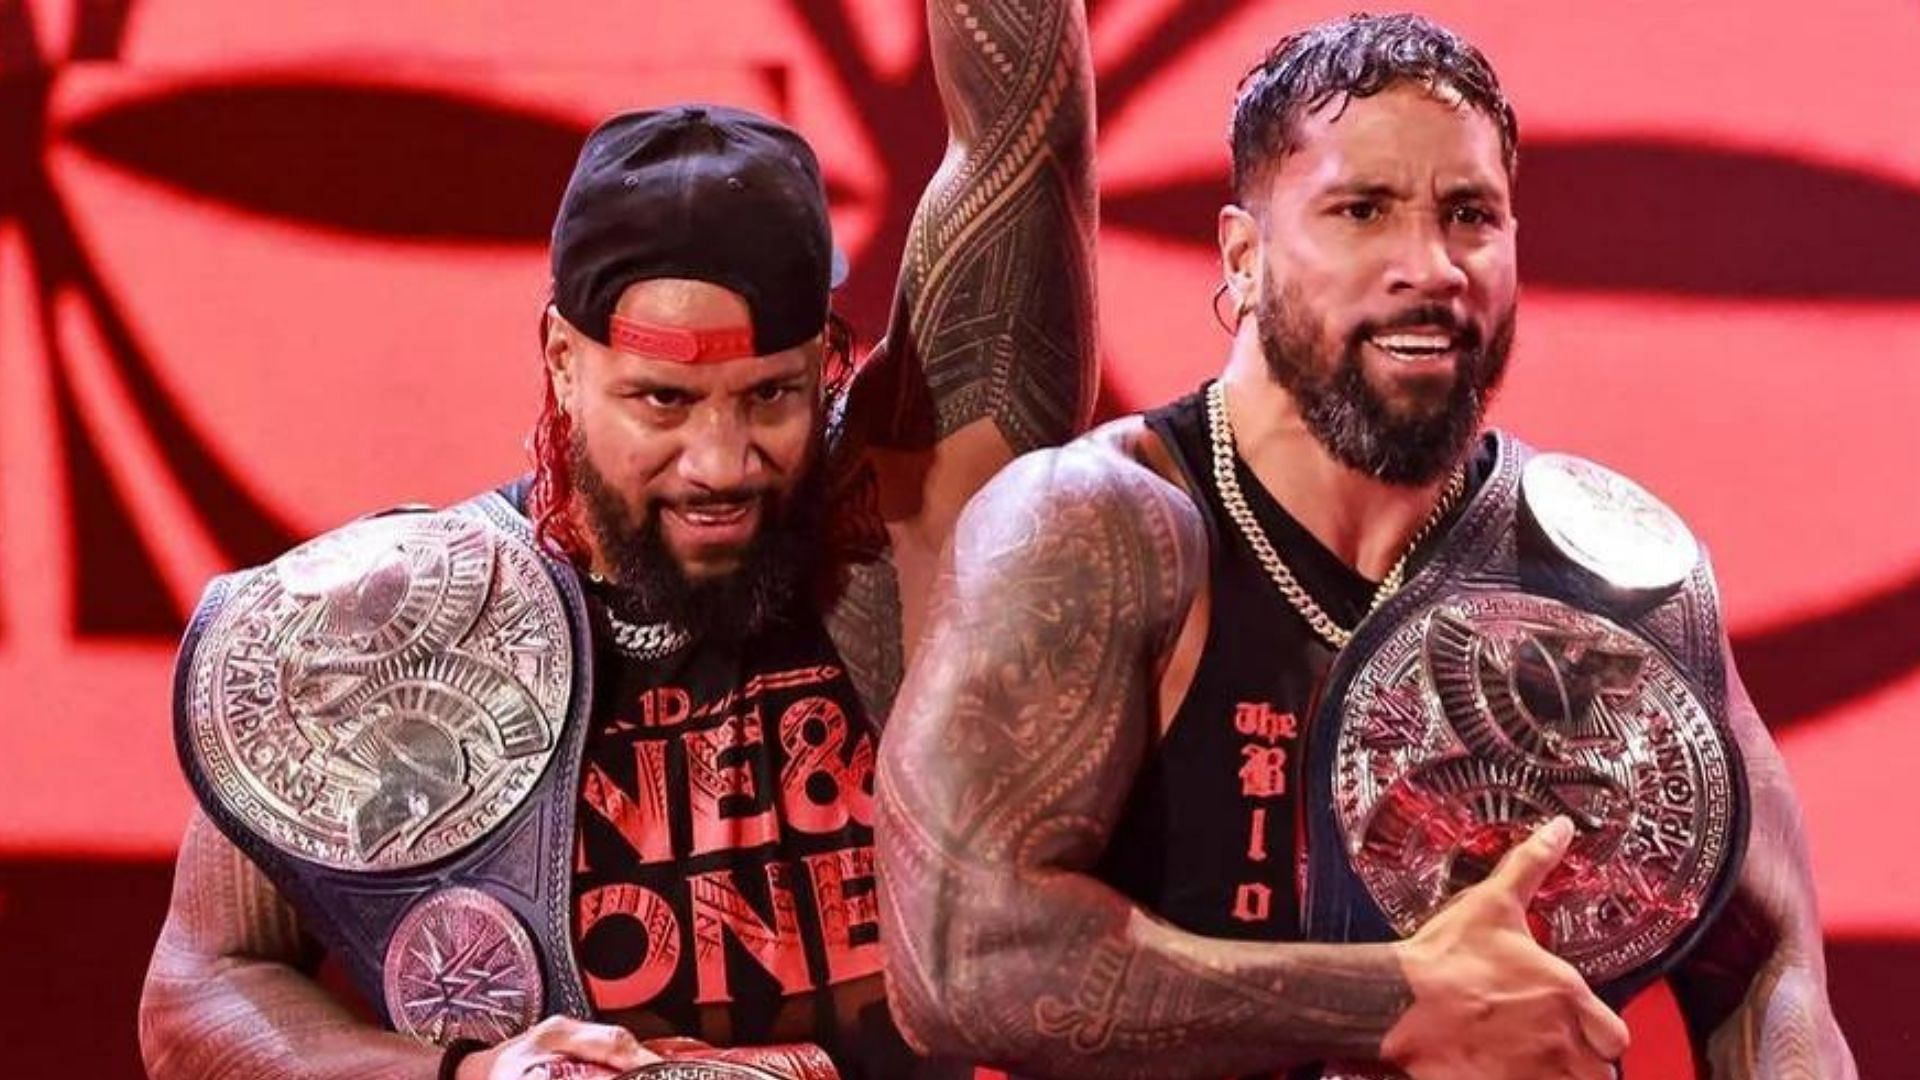 Who could possibly dethrone The Usos?